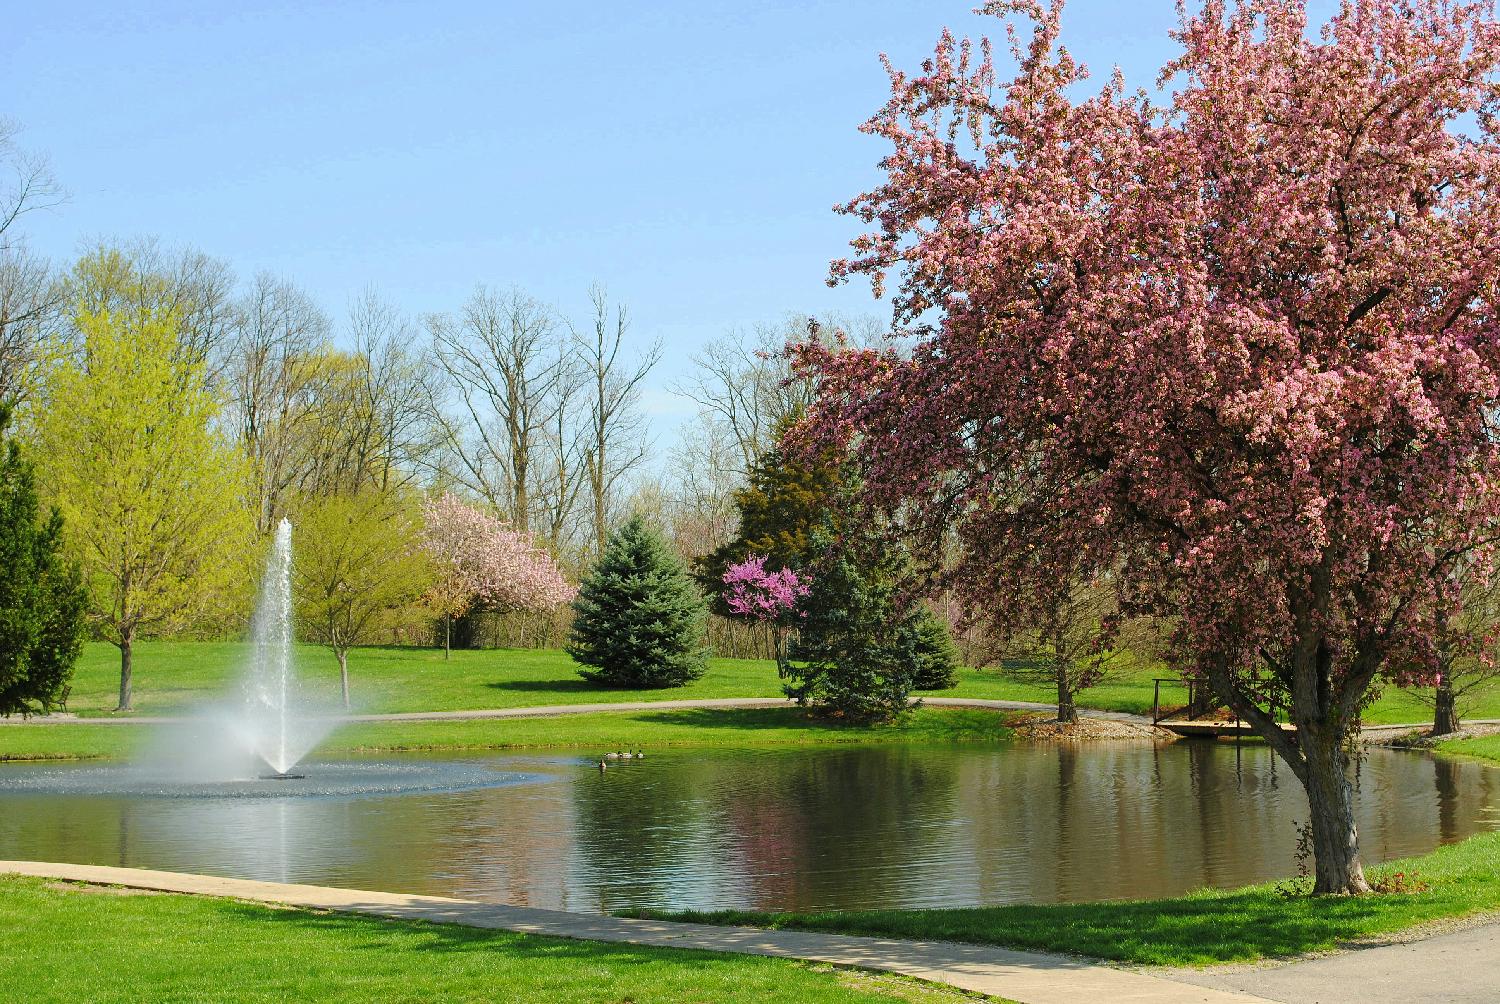 A view of the pond on campus surrounded by beautiful blooming trees.